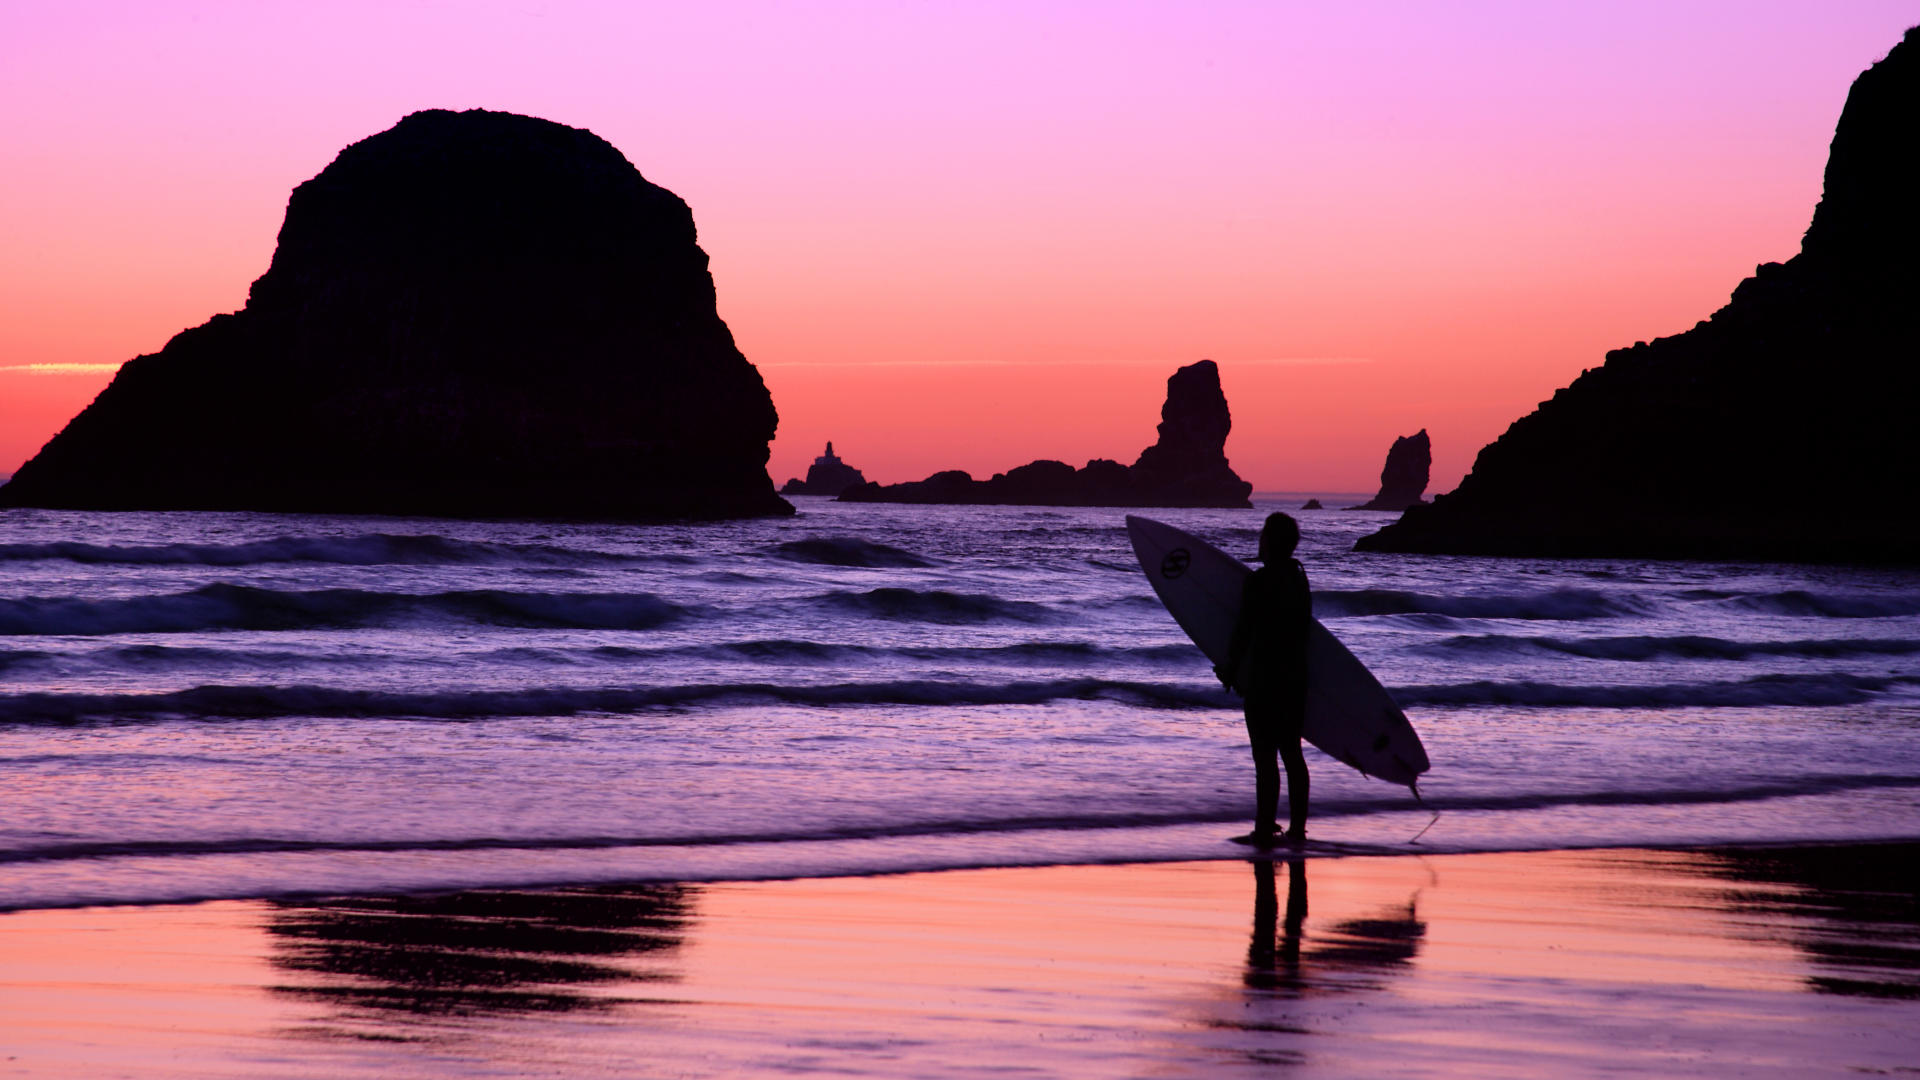 Beach Desktop Background And Wallpaper Surfer At Sunset Cannon